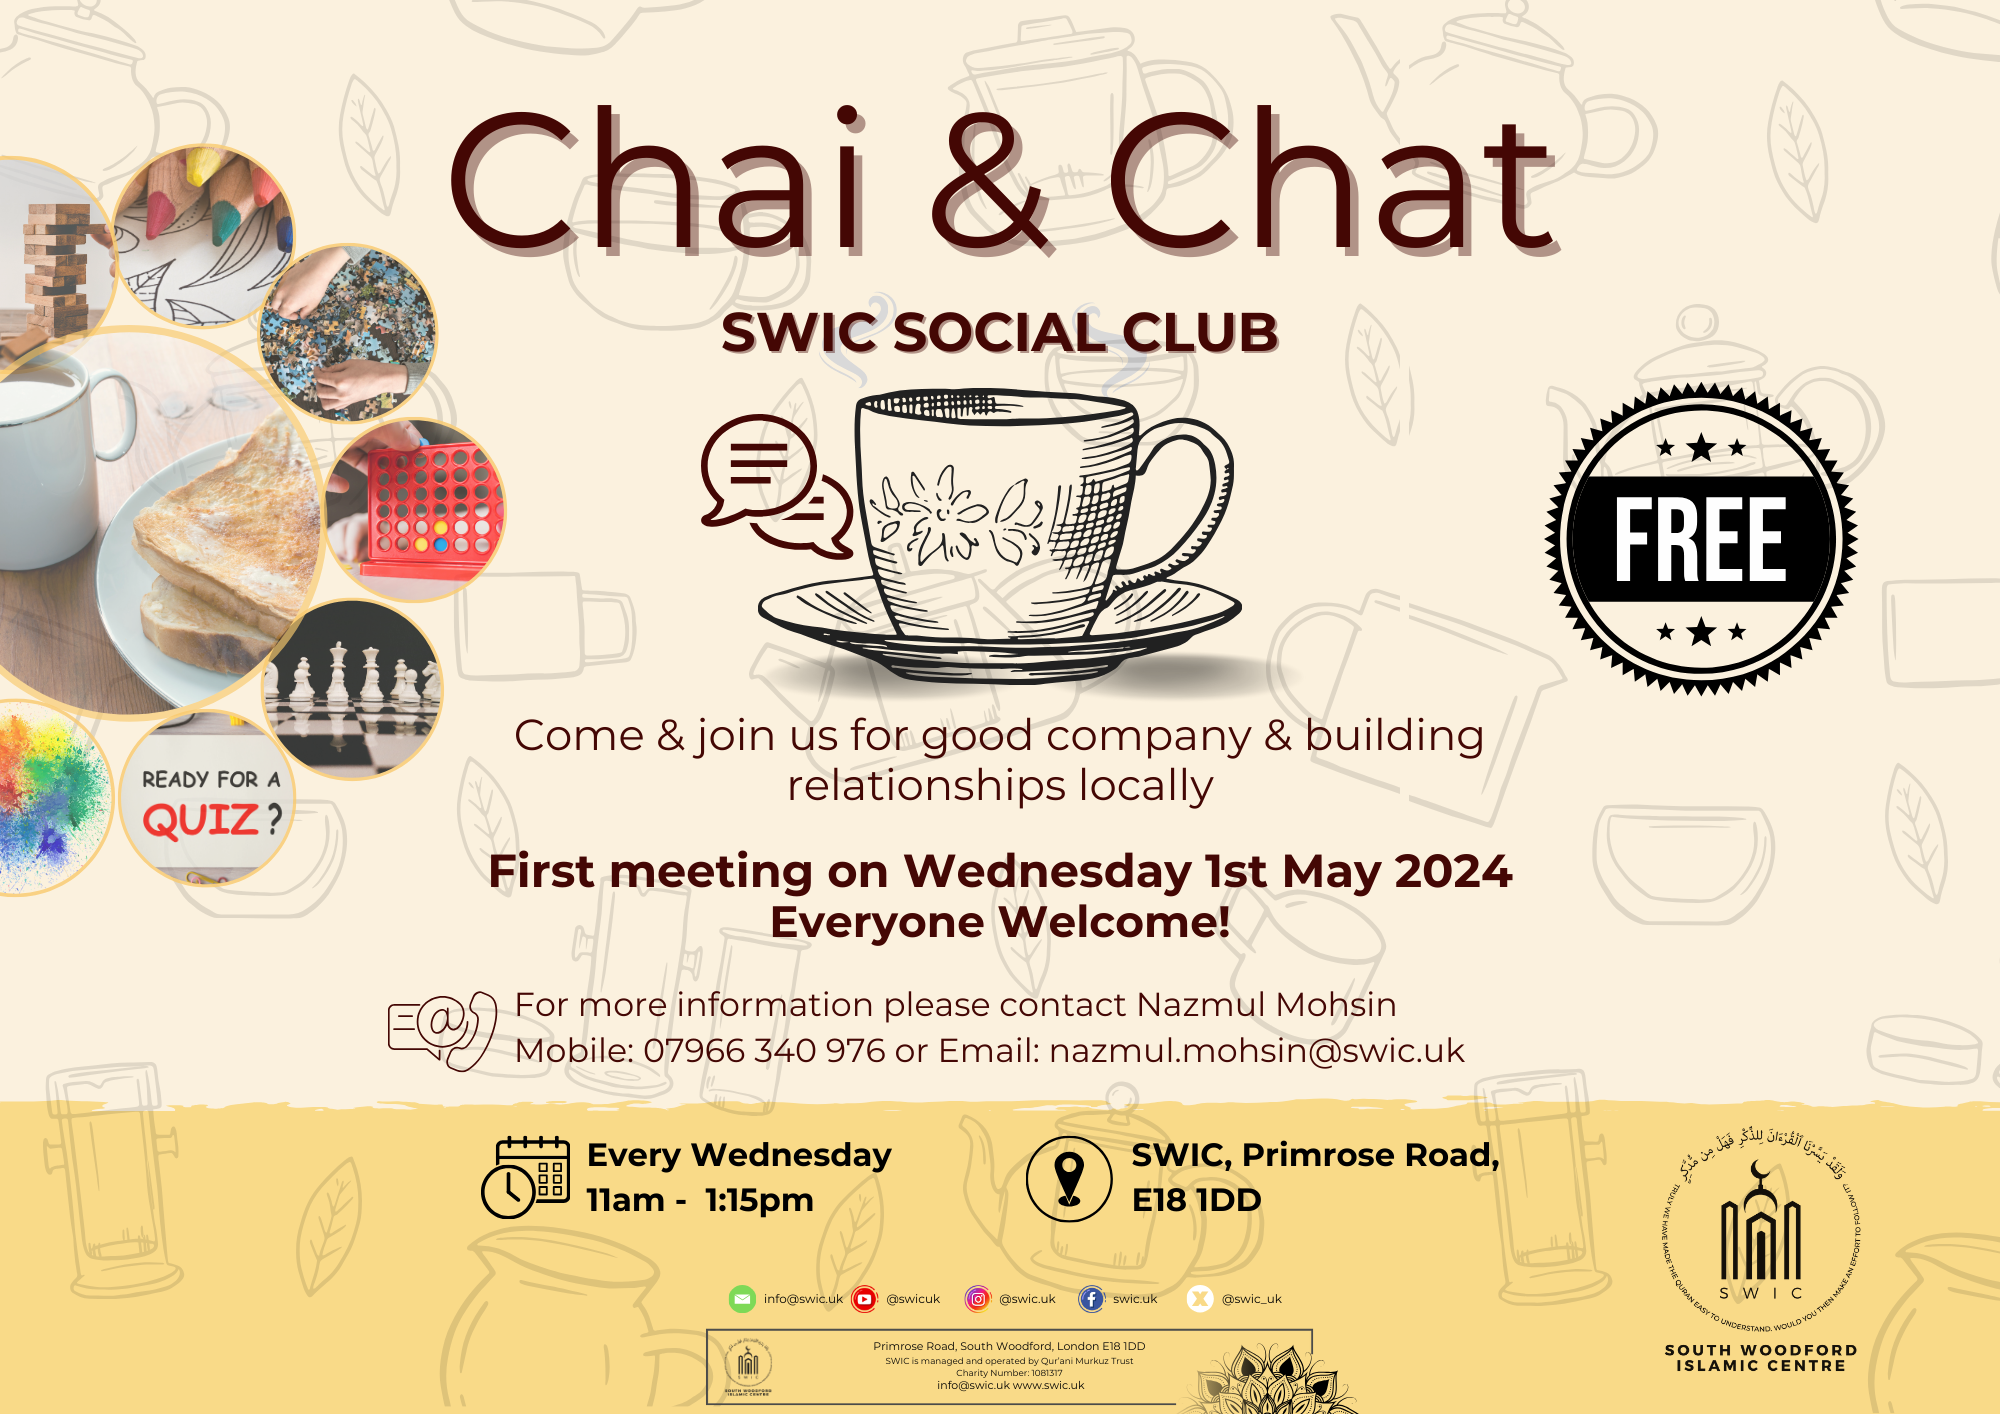 Chai & Chat - Everyone Welcome